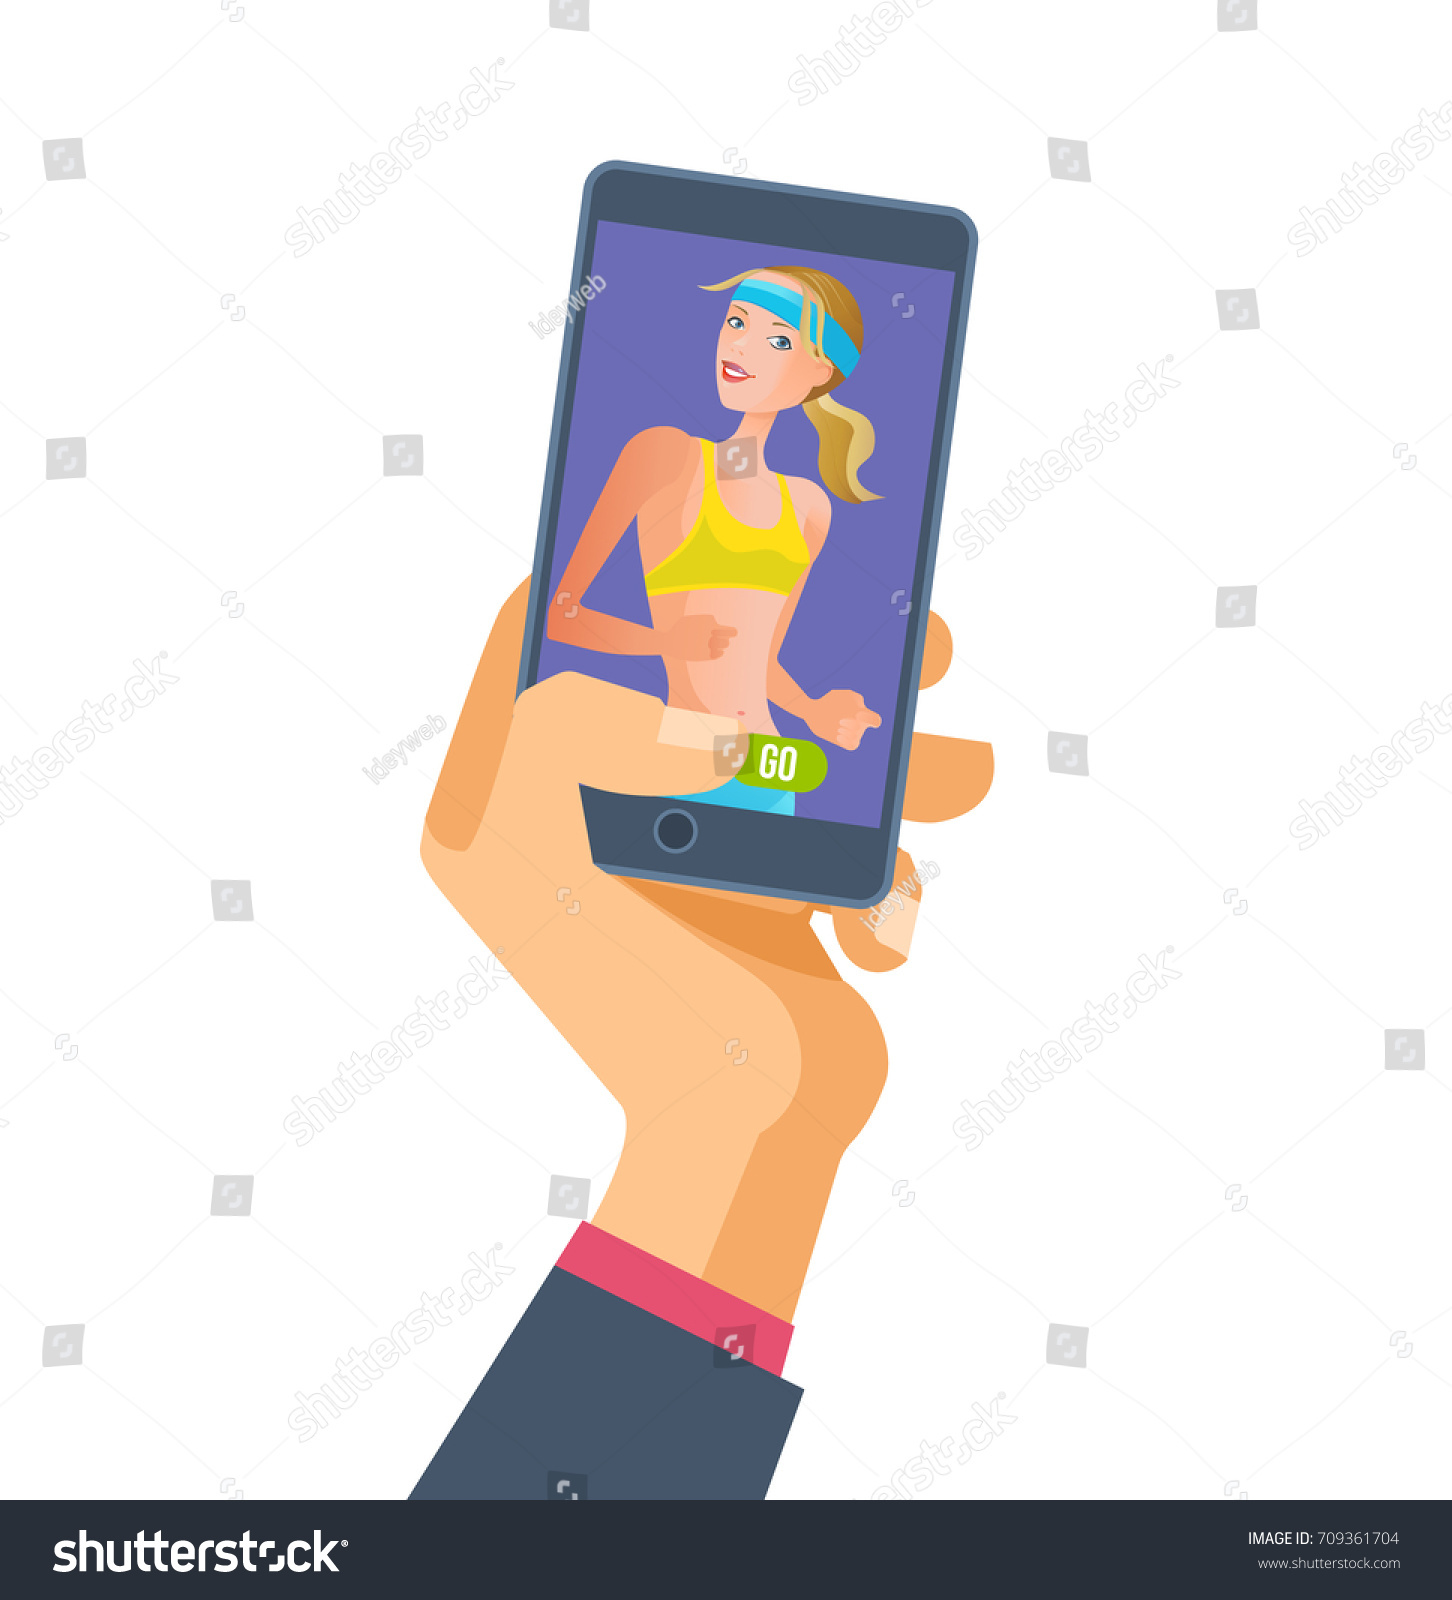 SVG of Hand holds the smartphone. Fitness application on the phone with a touch screen. Control and management of sports and tracking results. Mobile applications. Vector illustration isolated. svg